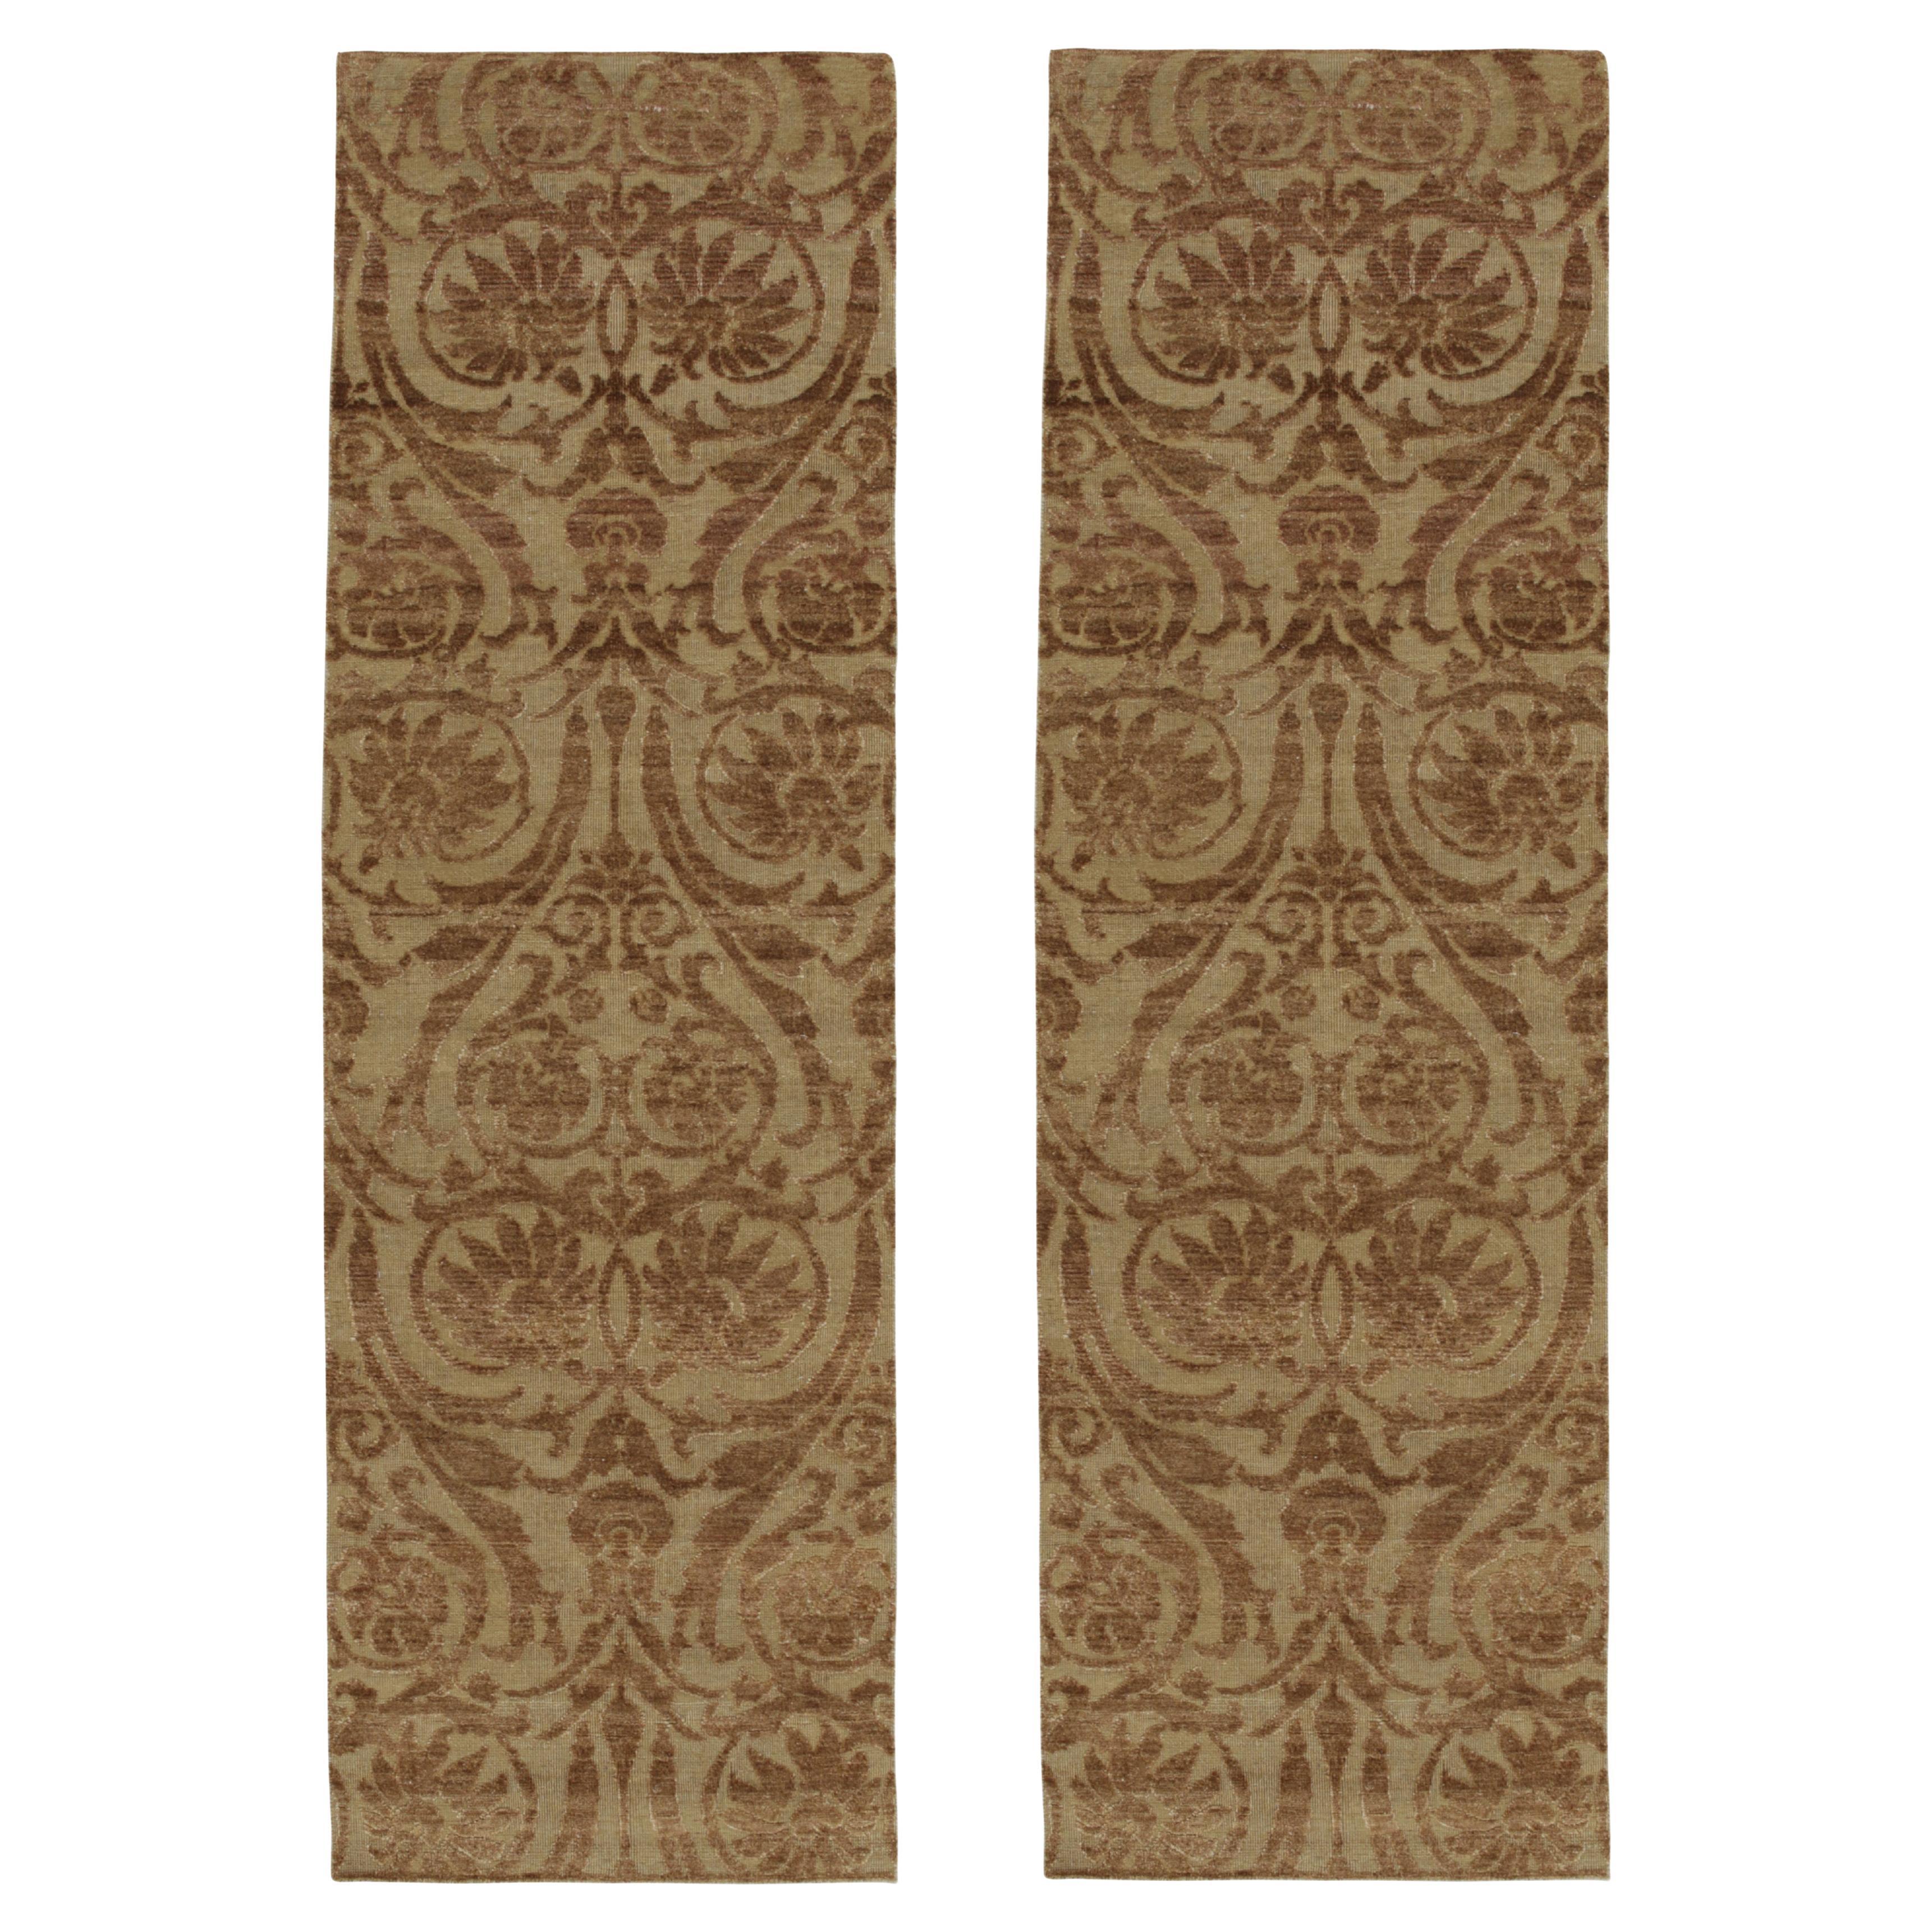 Rug & Kilim’s European Style Twin Runners in Beige with Brown Floral Patterns For Sale